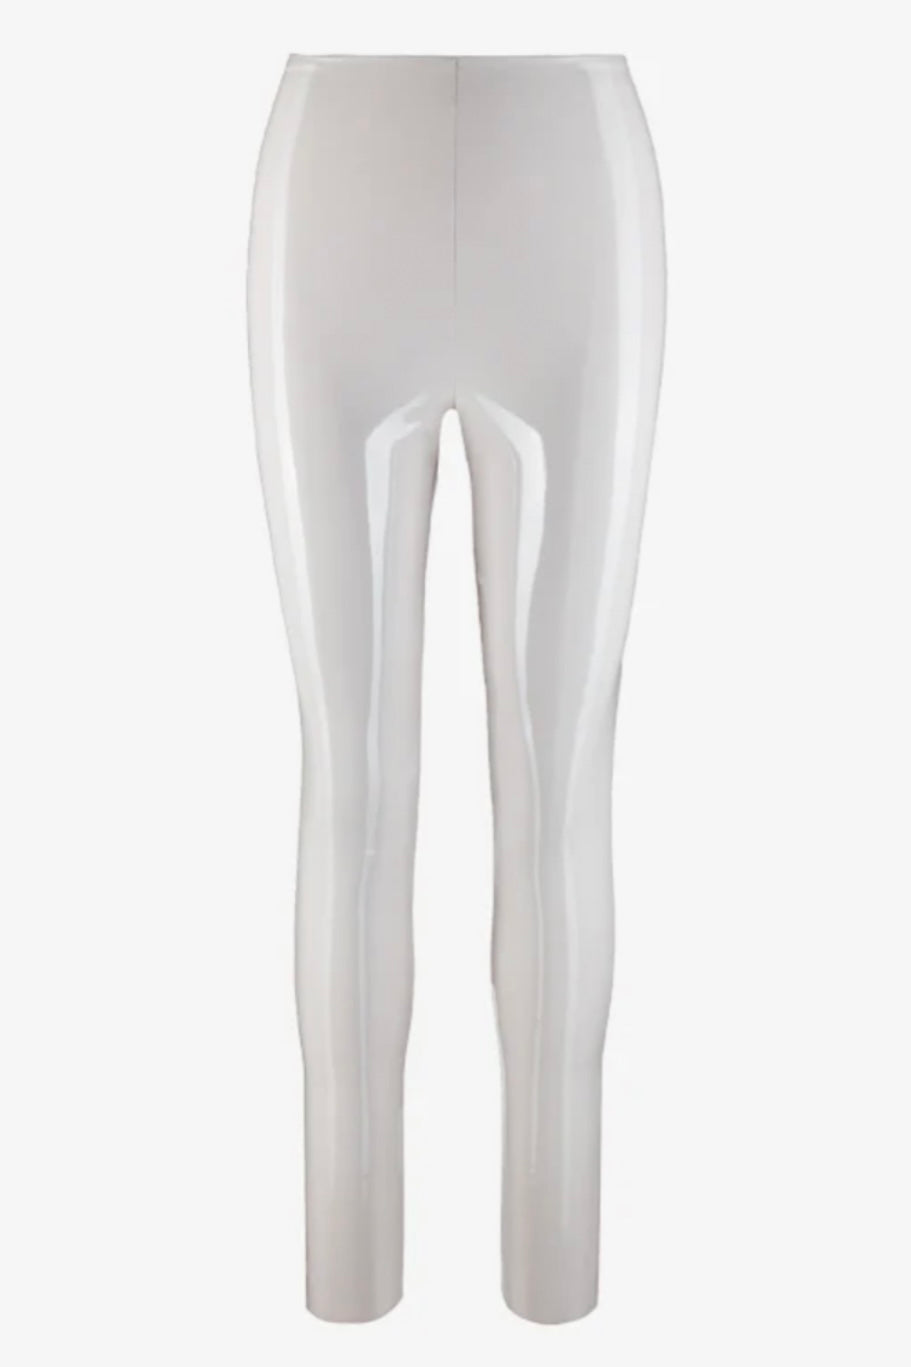 Commando Faux Patent Leather Leggings With Perfect Control